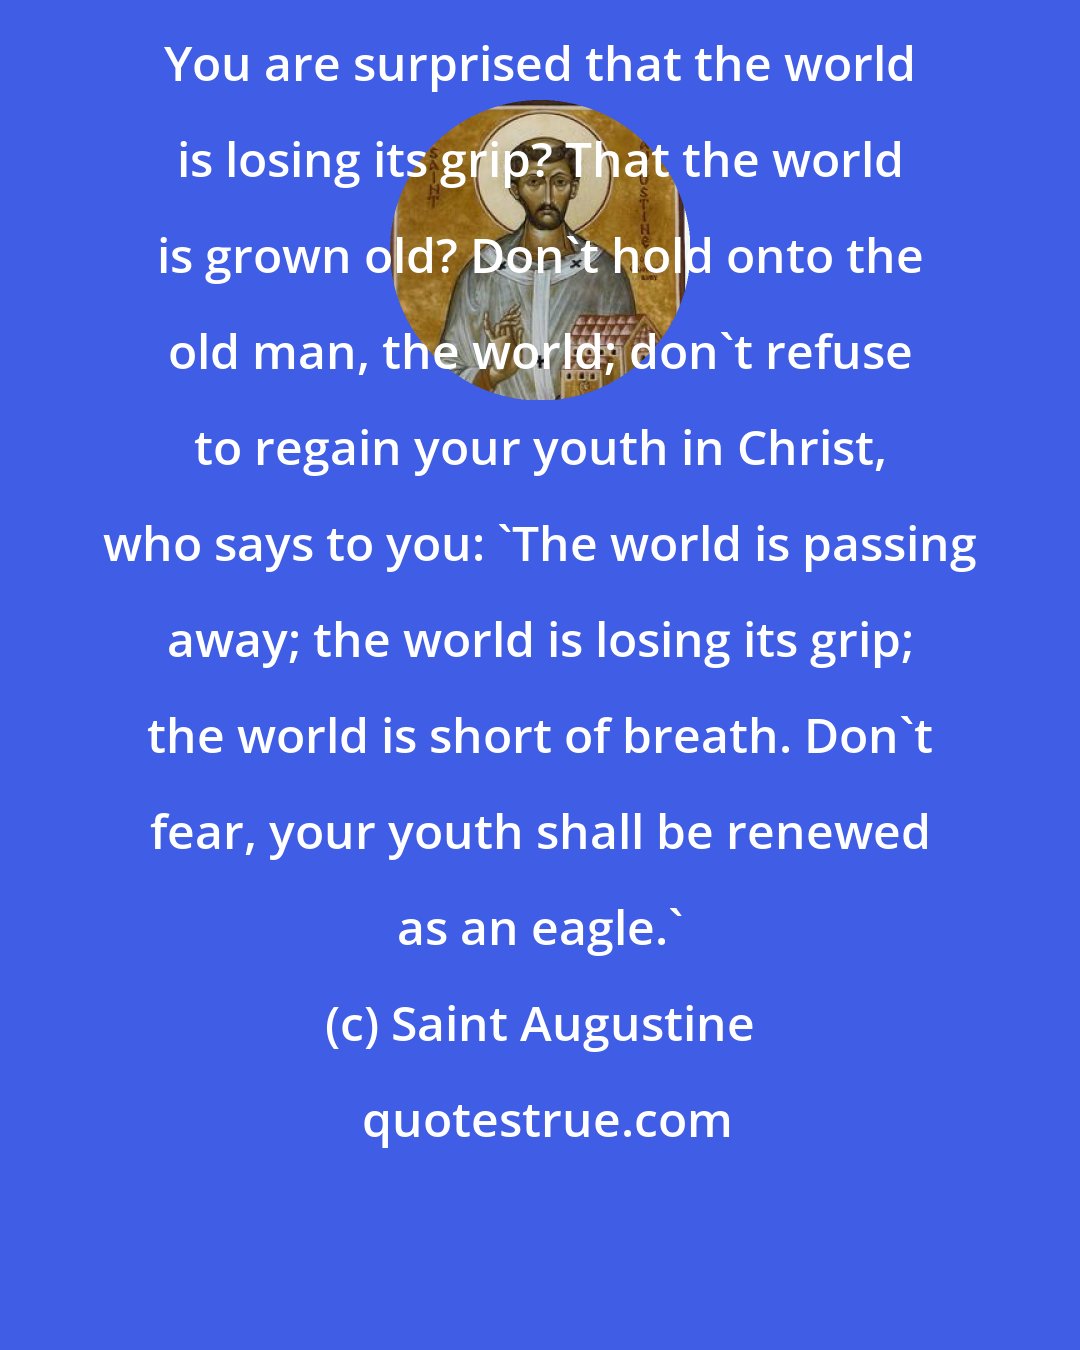 Saint Augustine: You are surprised that the world is losing its grip? That the world is grown old? Don't hold onto the old man, the world; don't refuse to regain your youth in Christ, who says to you: 'The world is passing away; the world is losing its grip; the world is short of breath. Don't fear, your youth shall be renewed as an eagle.'